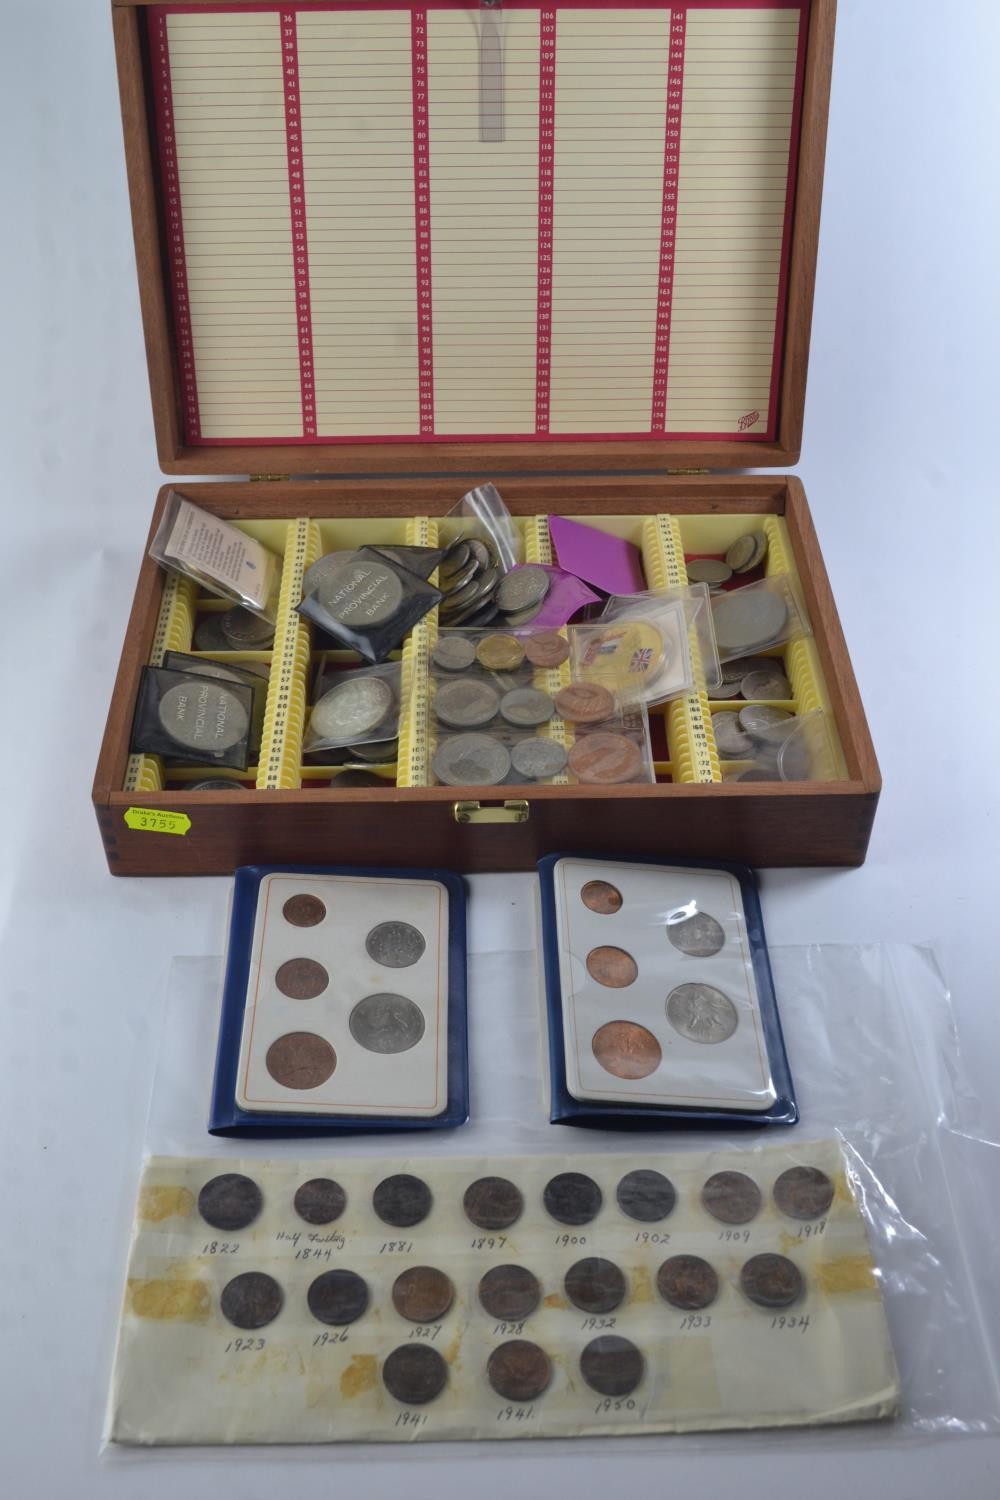 Slide box containing mostly British coins, including half crowns and commemorative 